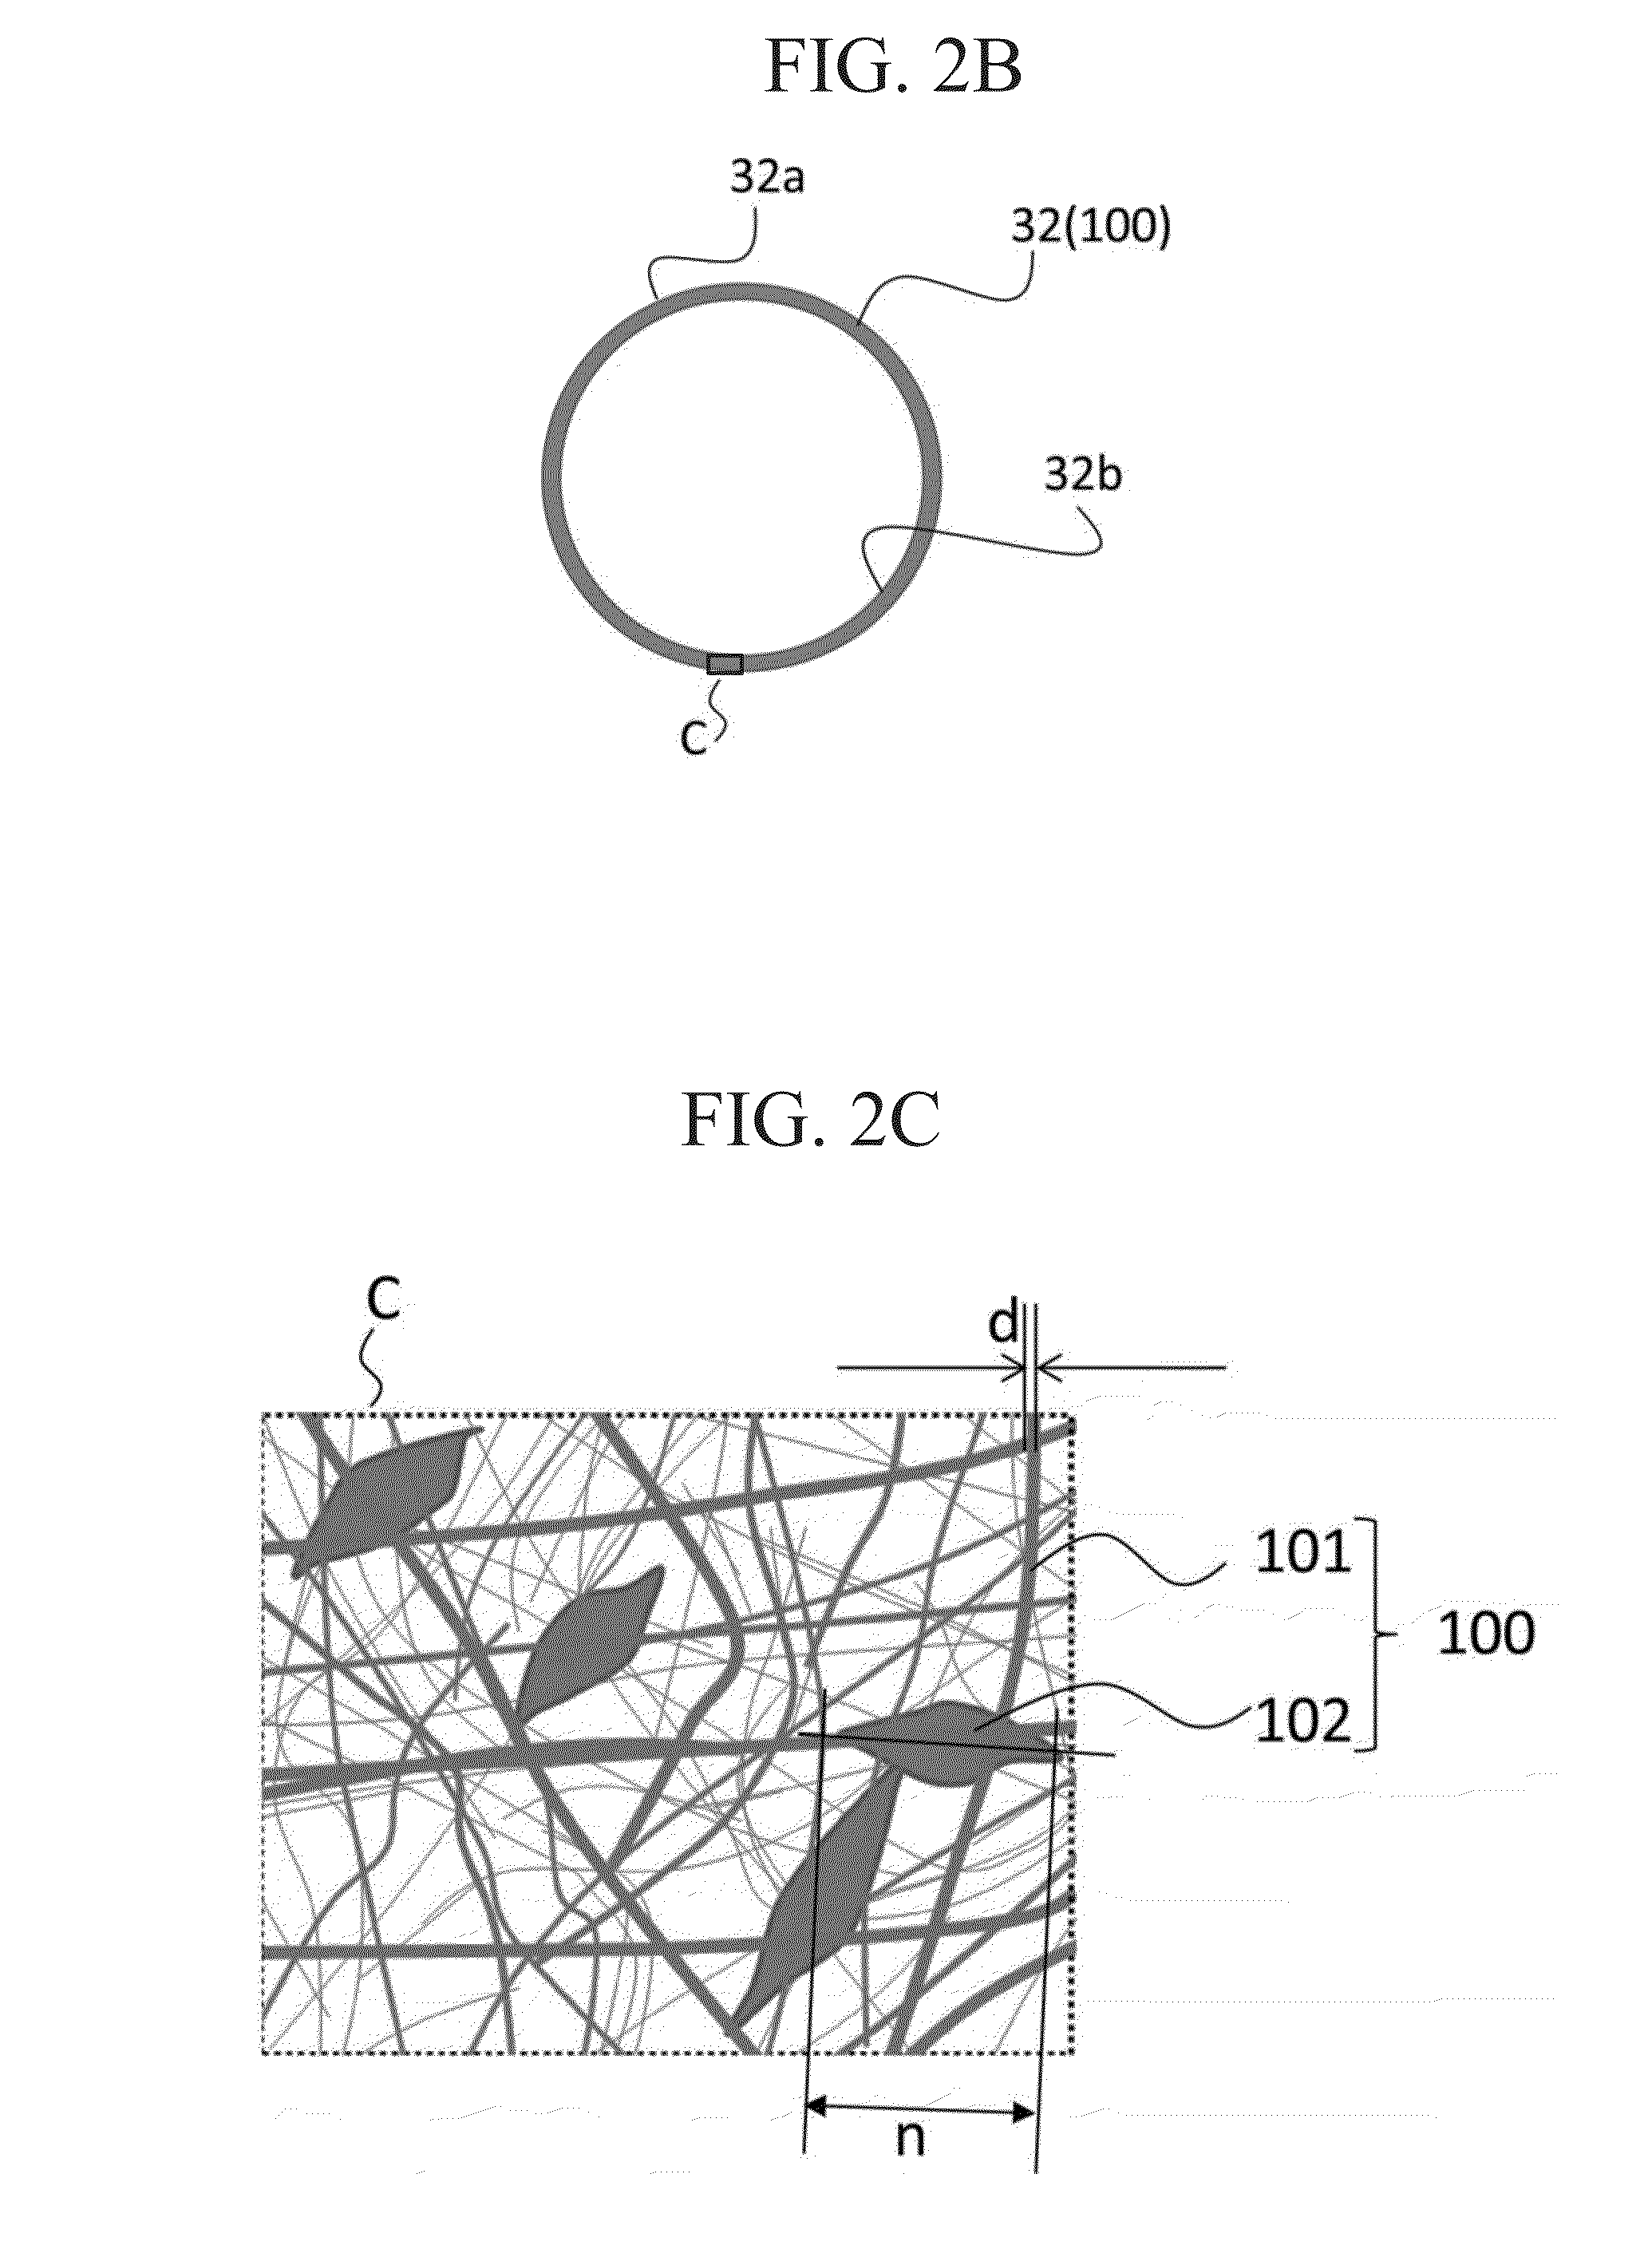 Blood purification membrane, method for manufacturing blood purification membrane, and dialysis device